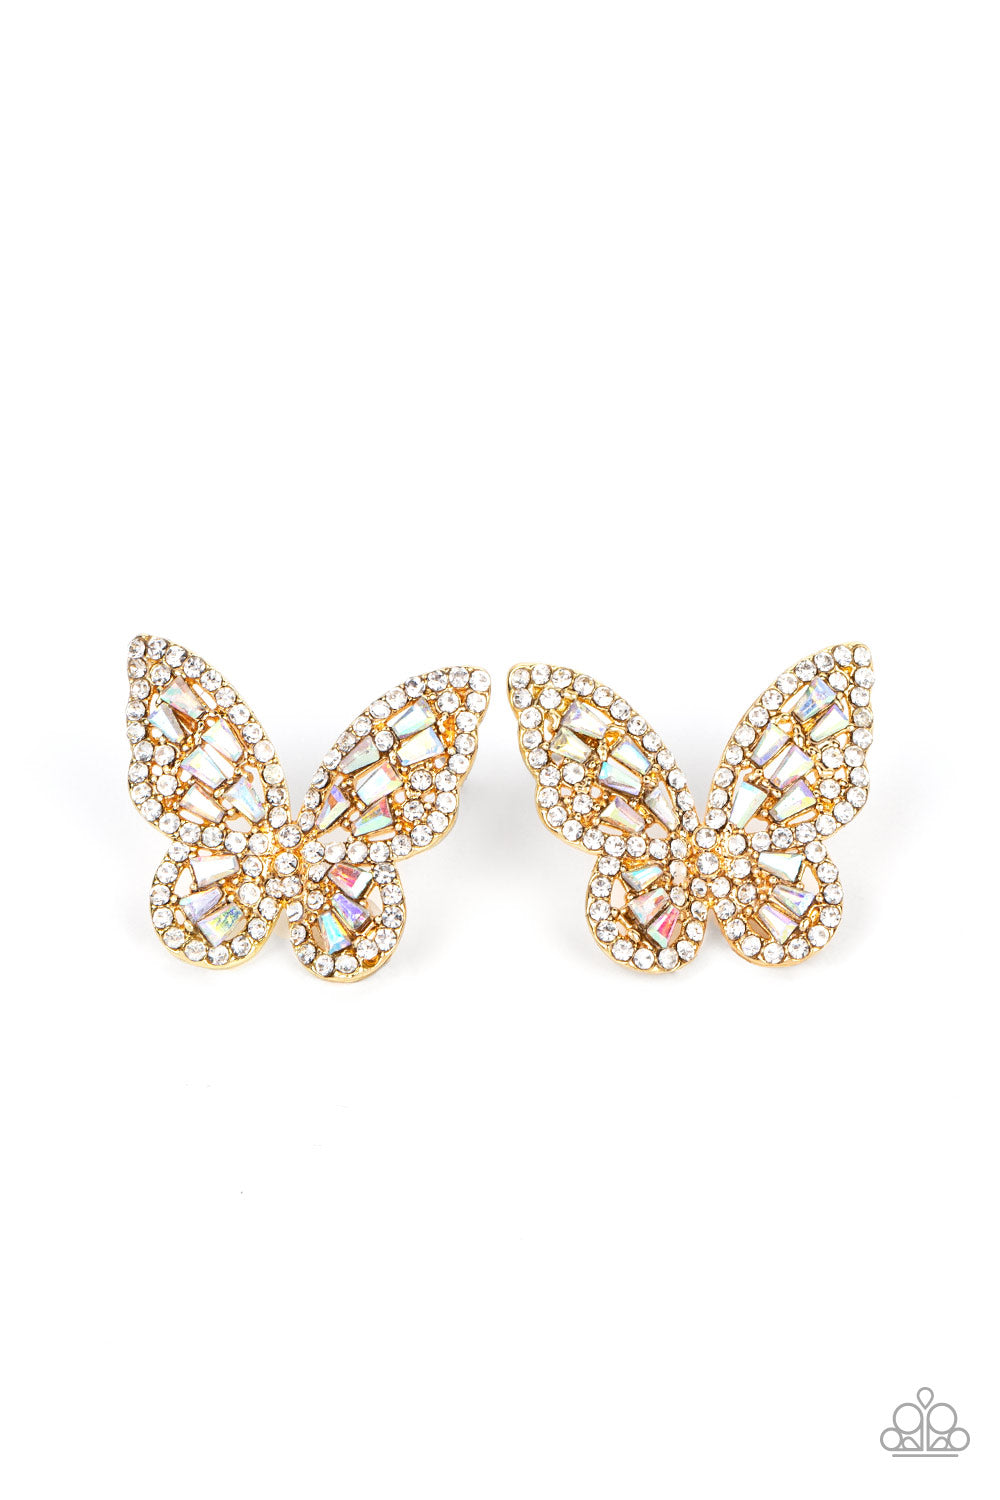 Smooth Like FLUTTER - Gold - VJ Bedazzled Jewelry